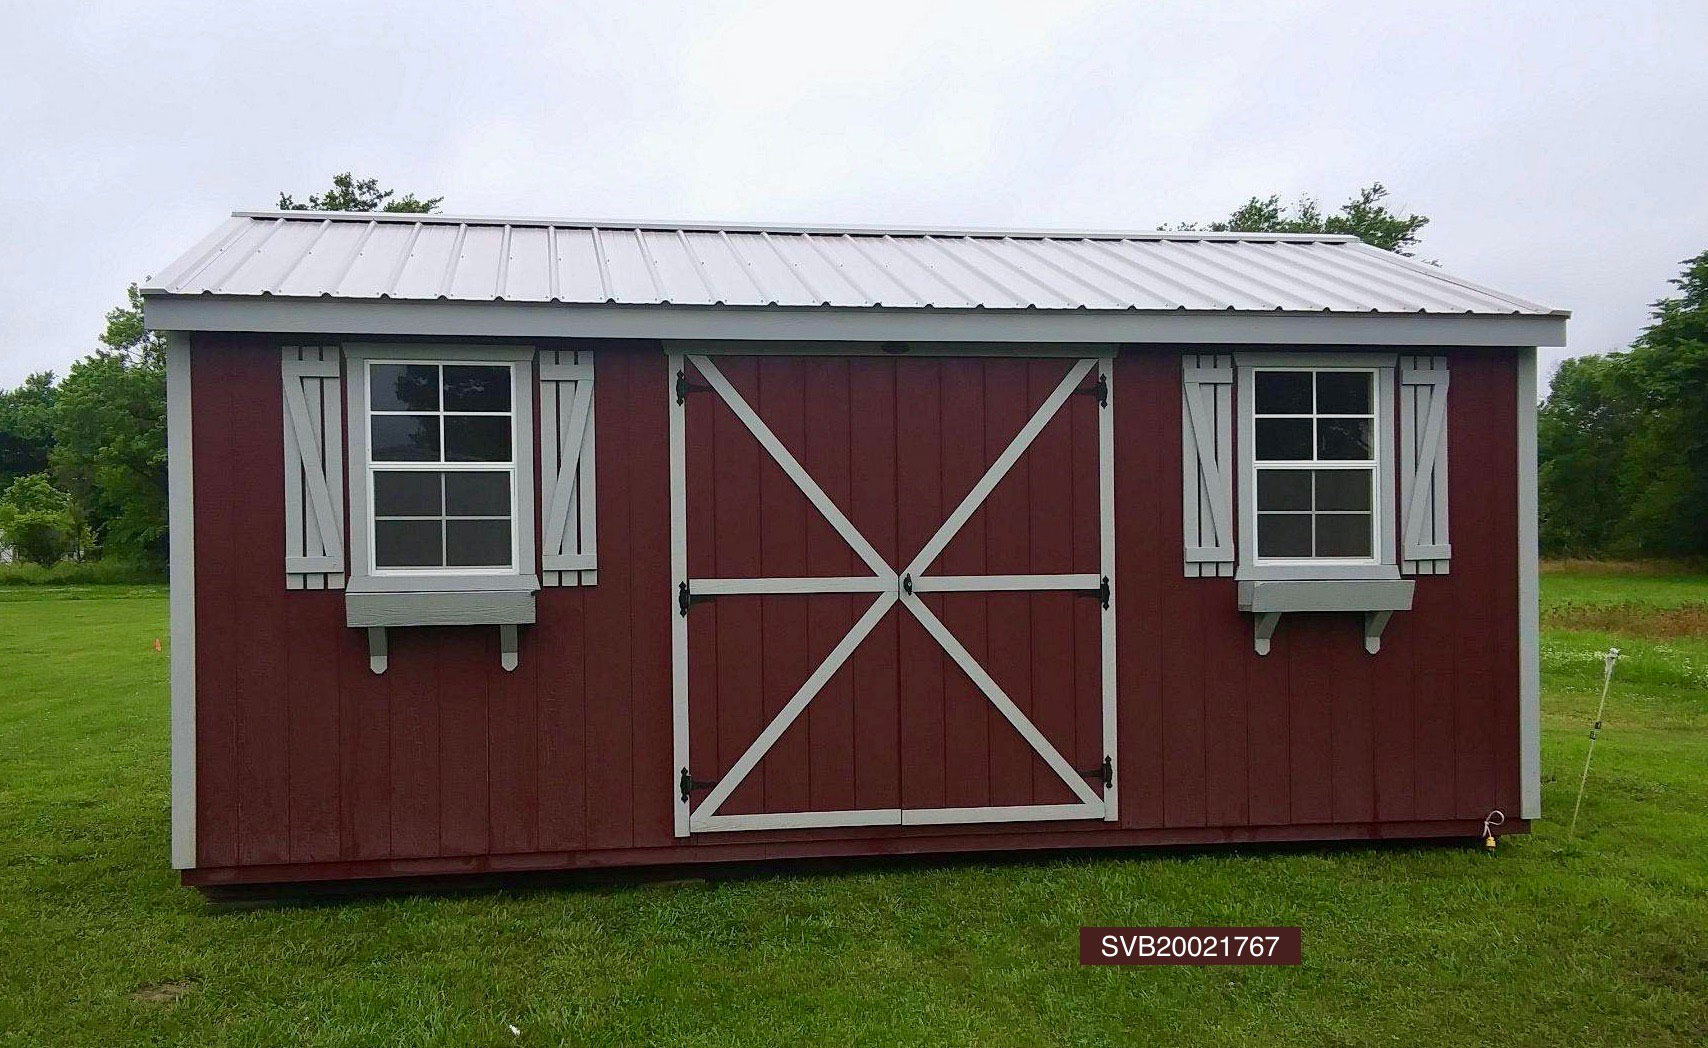 martins-mini-barns-spring-valley-sheds-gallery (96)